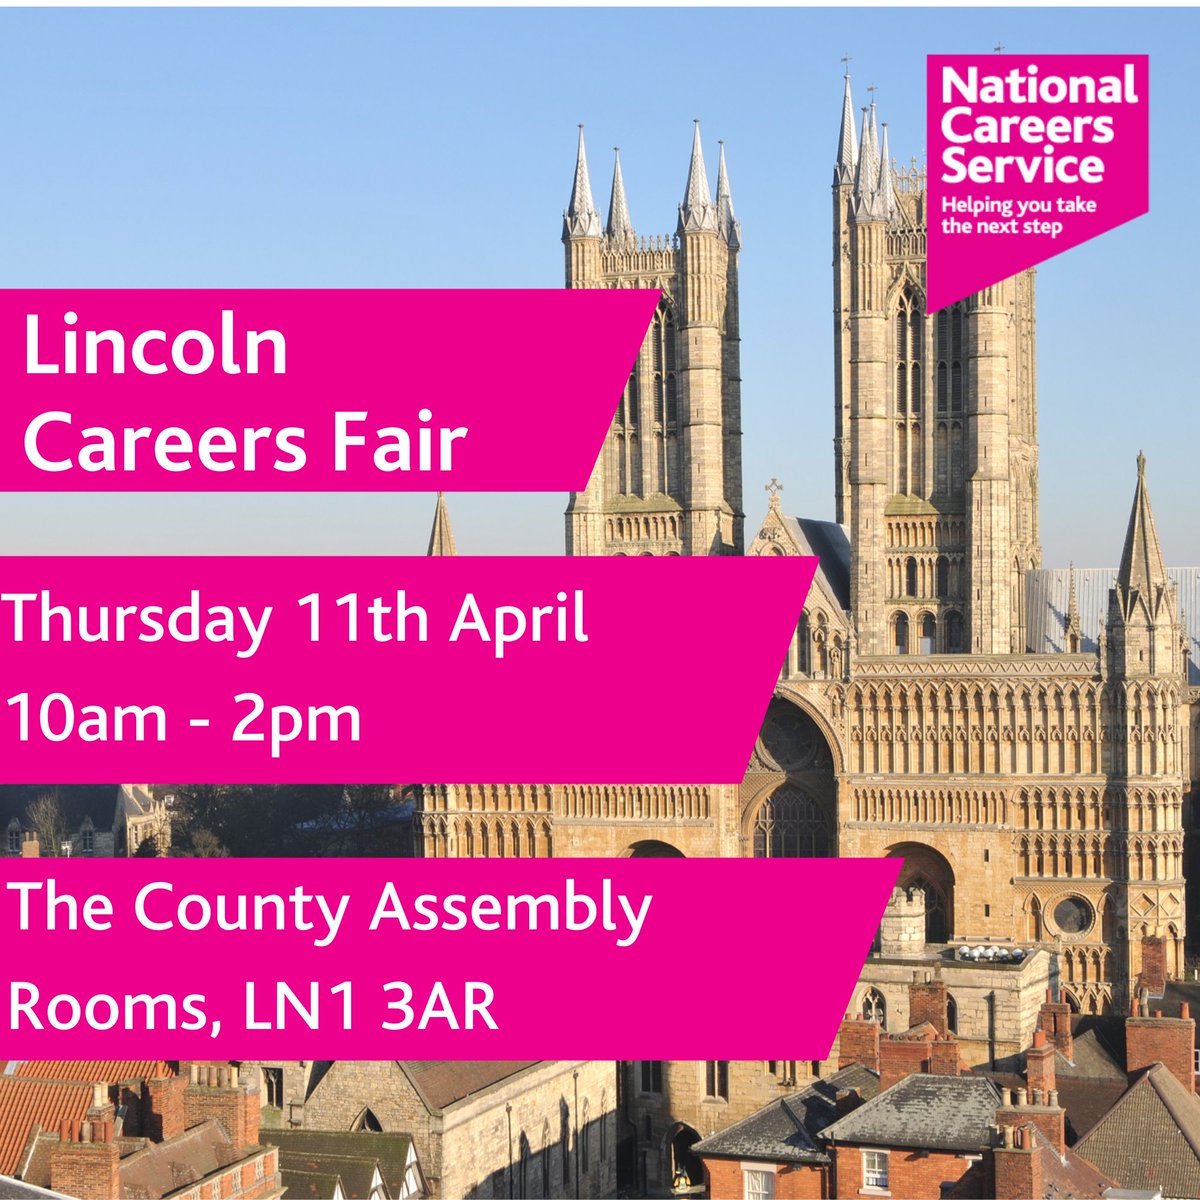 Mark your calendars - we're back in #Lincoln this Thursday 📆 A Careers Fair is the perfect opportunity to find out what jobs are available in your area and even talk to potential employers face-to-face about the roles on offer. We'll see you there 👋